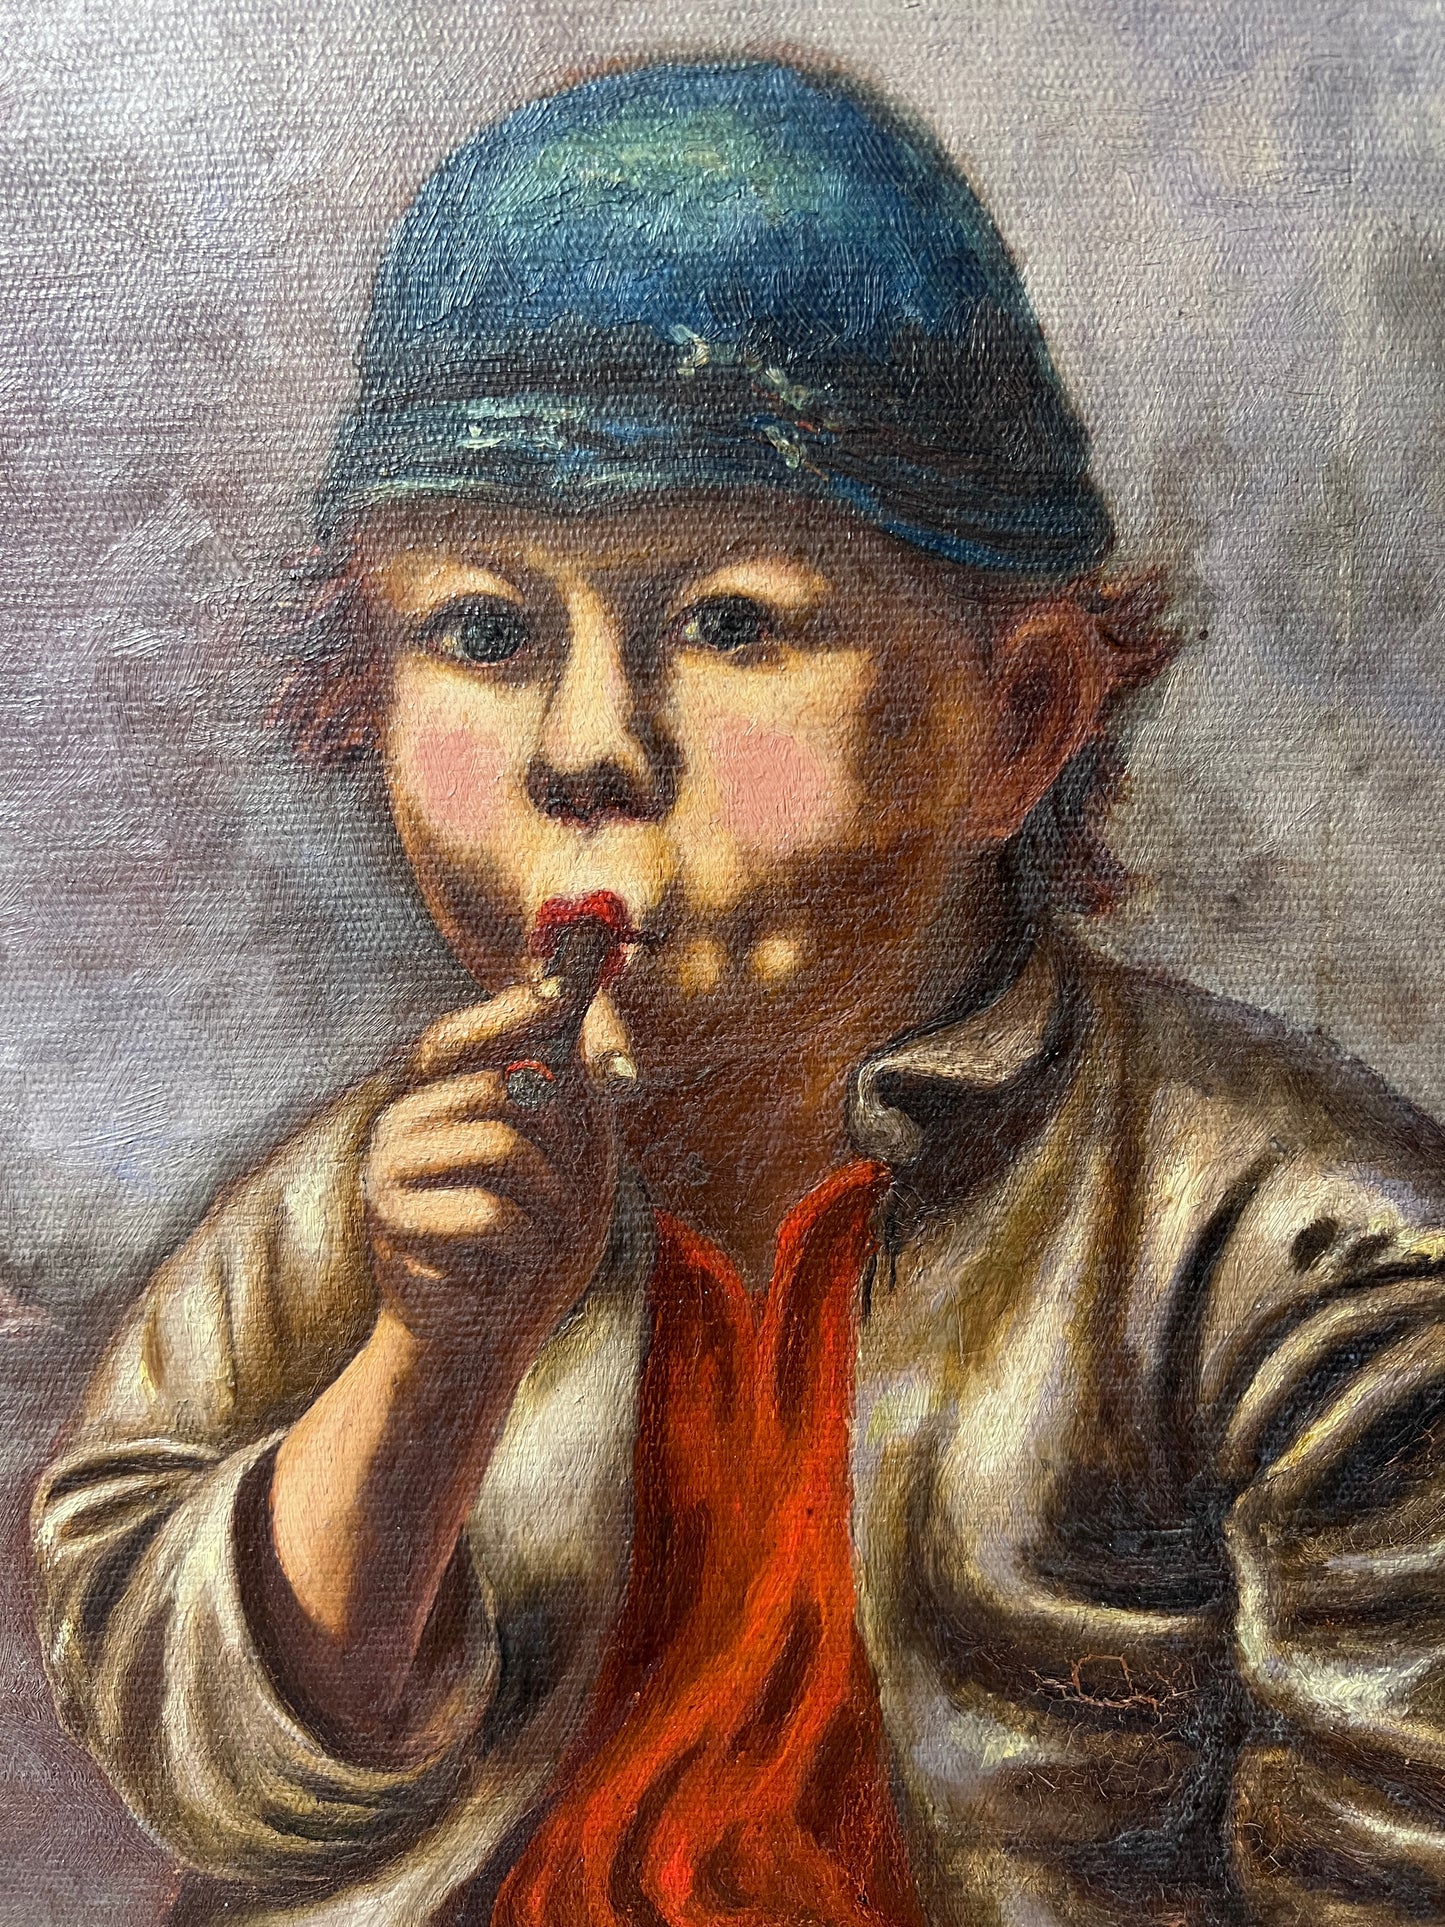 Original Vintage Oil Painting in canvas, Portrait of a Boy. Signed Dated, Framed